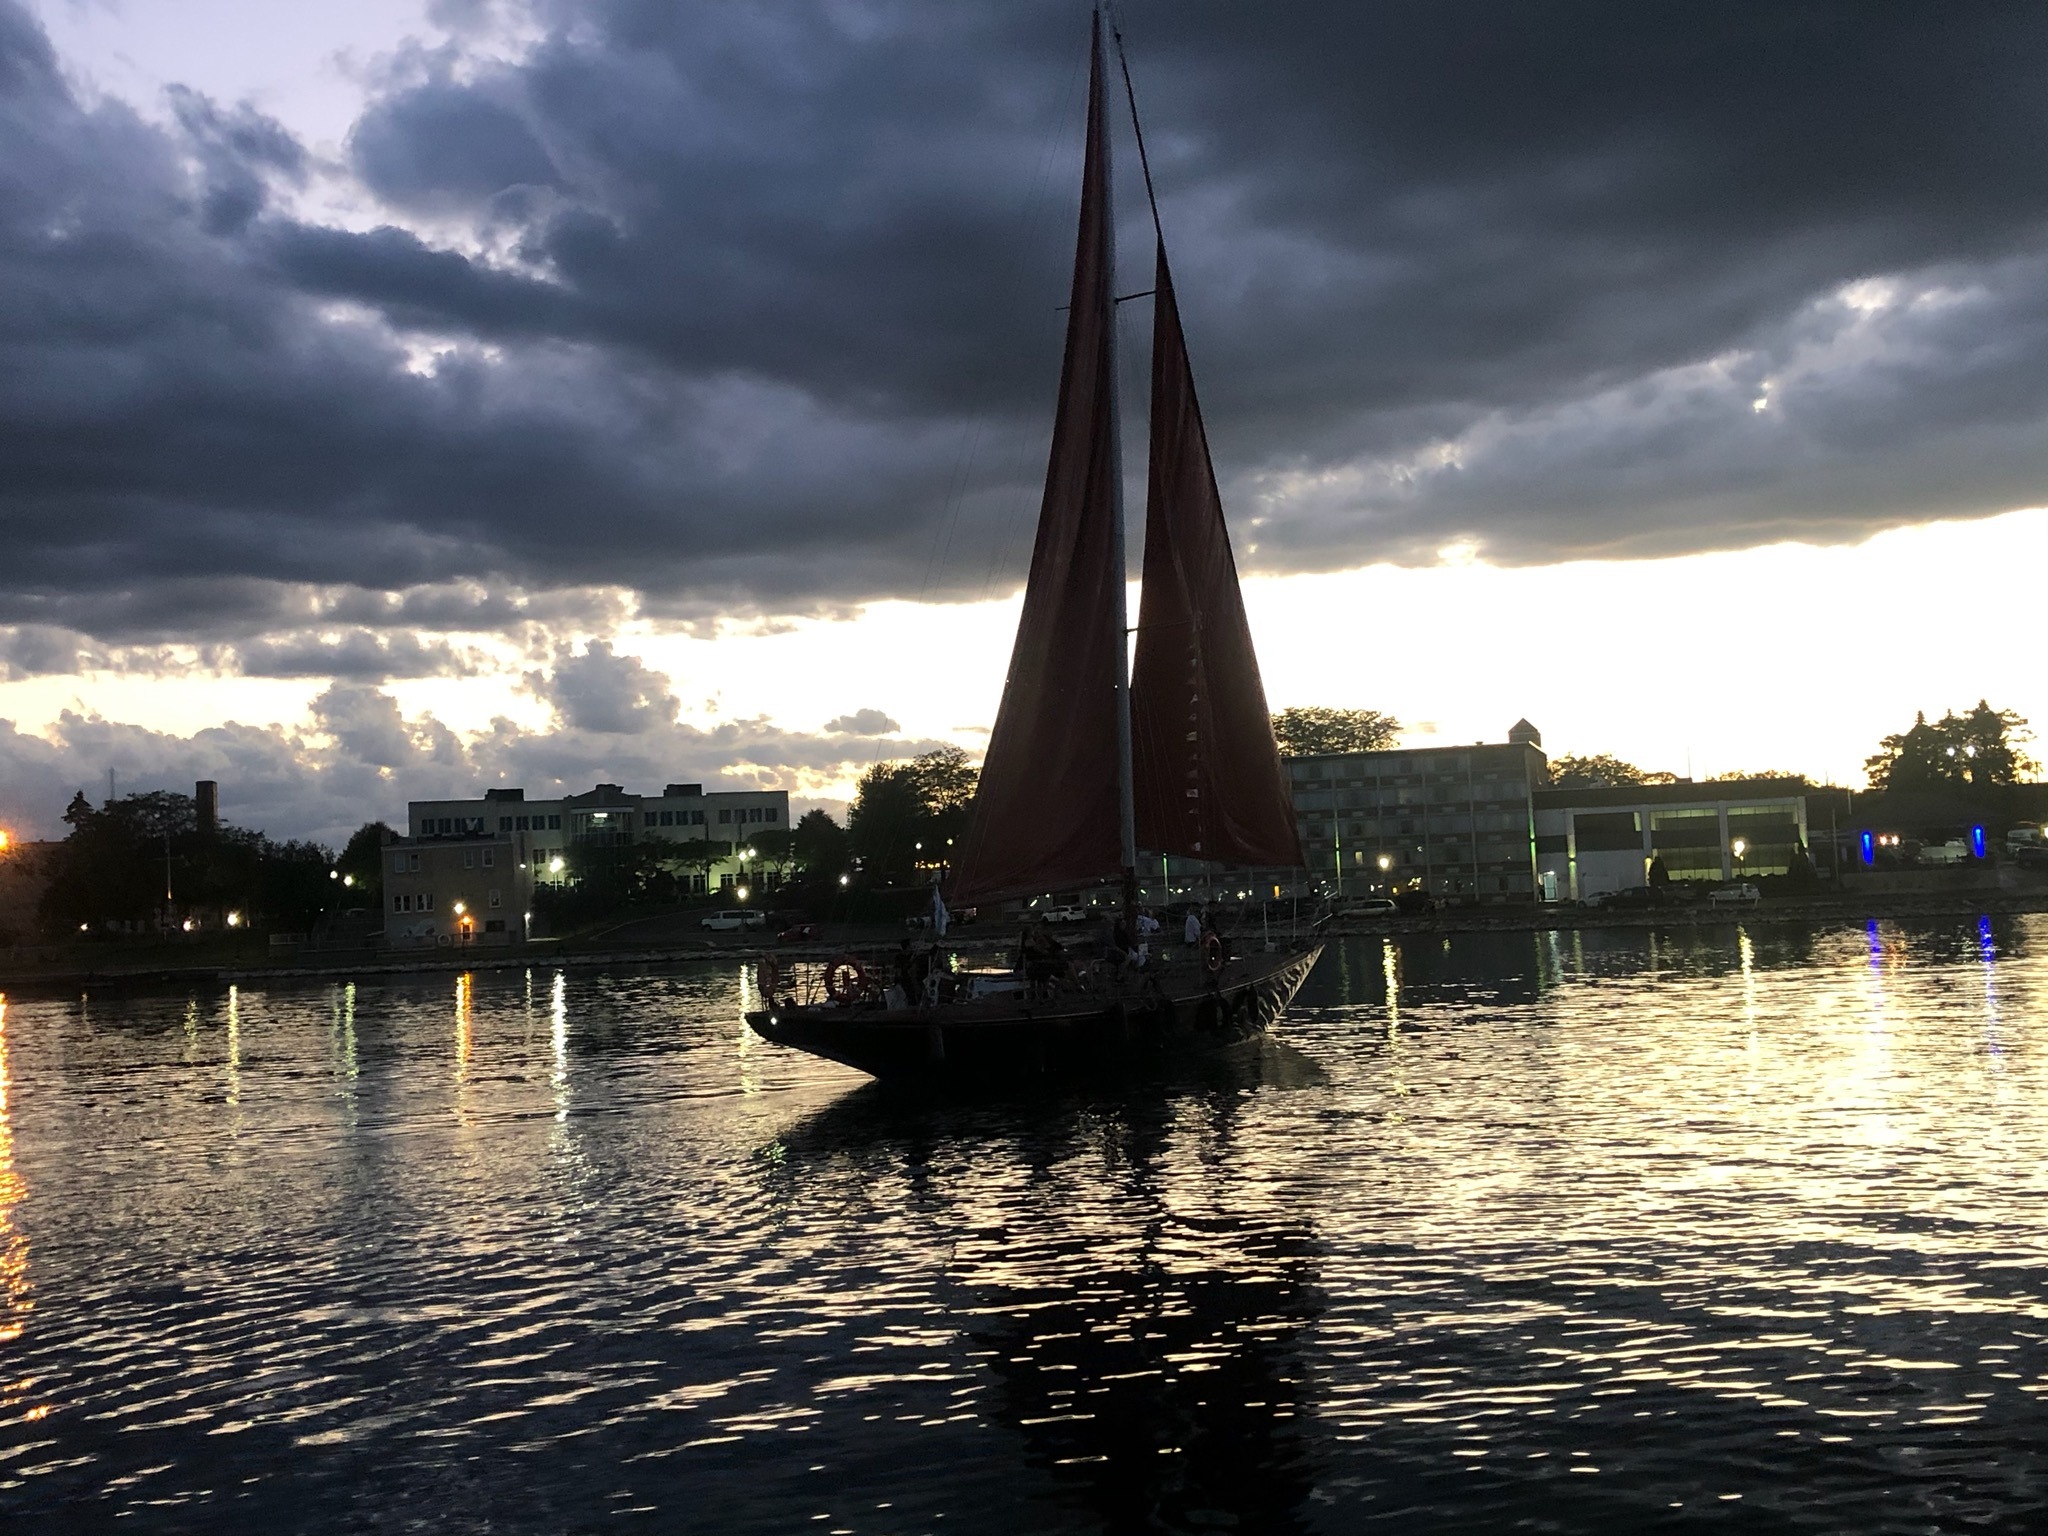 red witch yacht for sale